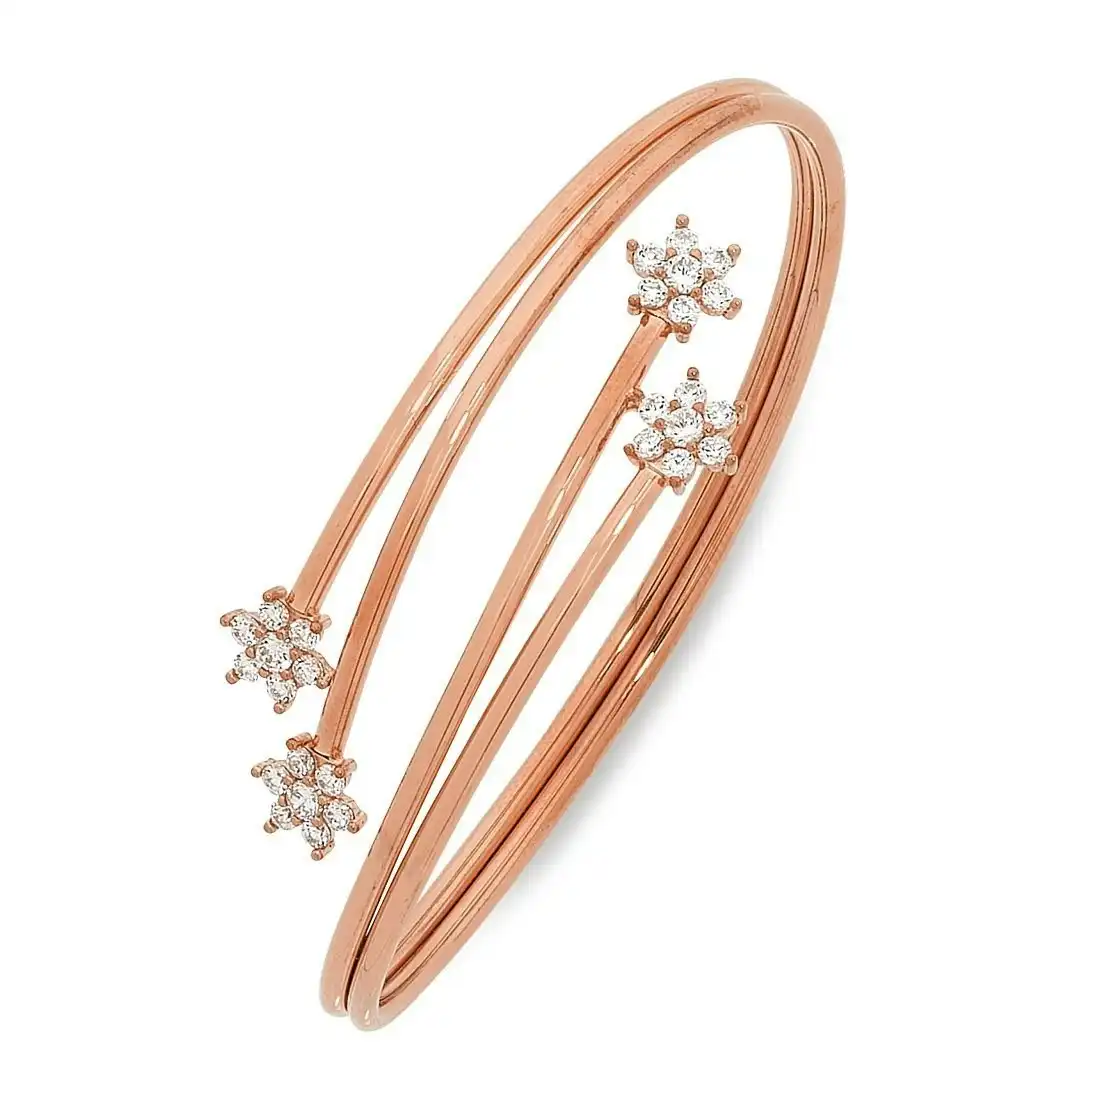 9ct Rose Gold Silver Infused Bangle with Flower Ends